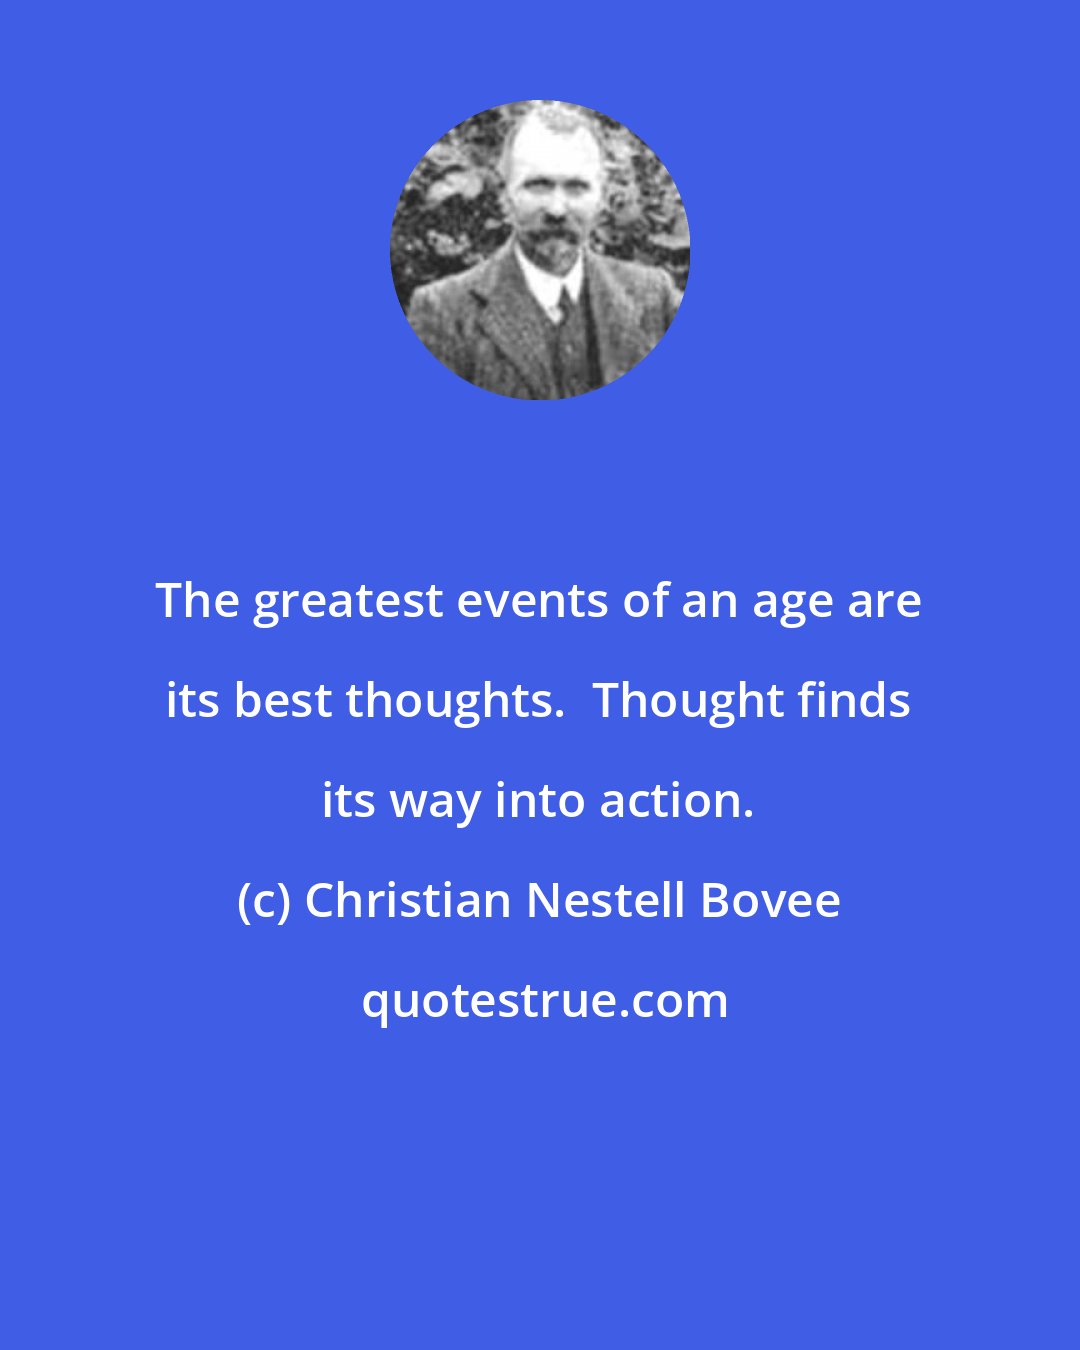 Christian Nestell Bovee: The greatest events of an age are its best thoughts.  Thought finds its way into action.